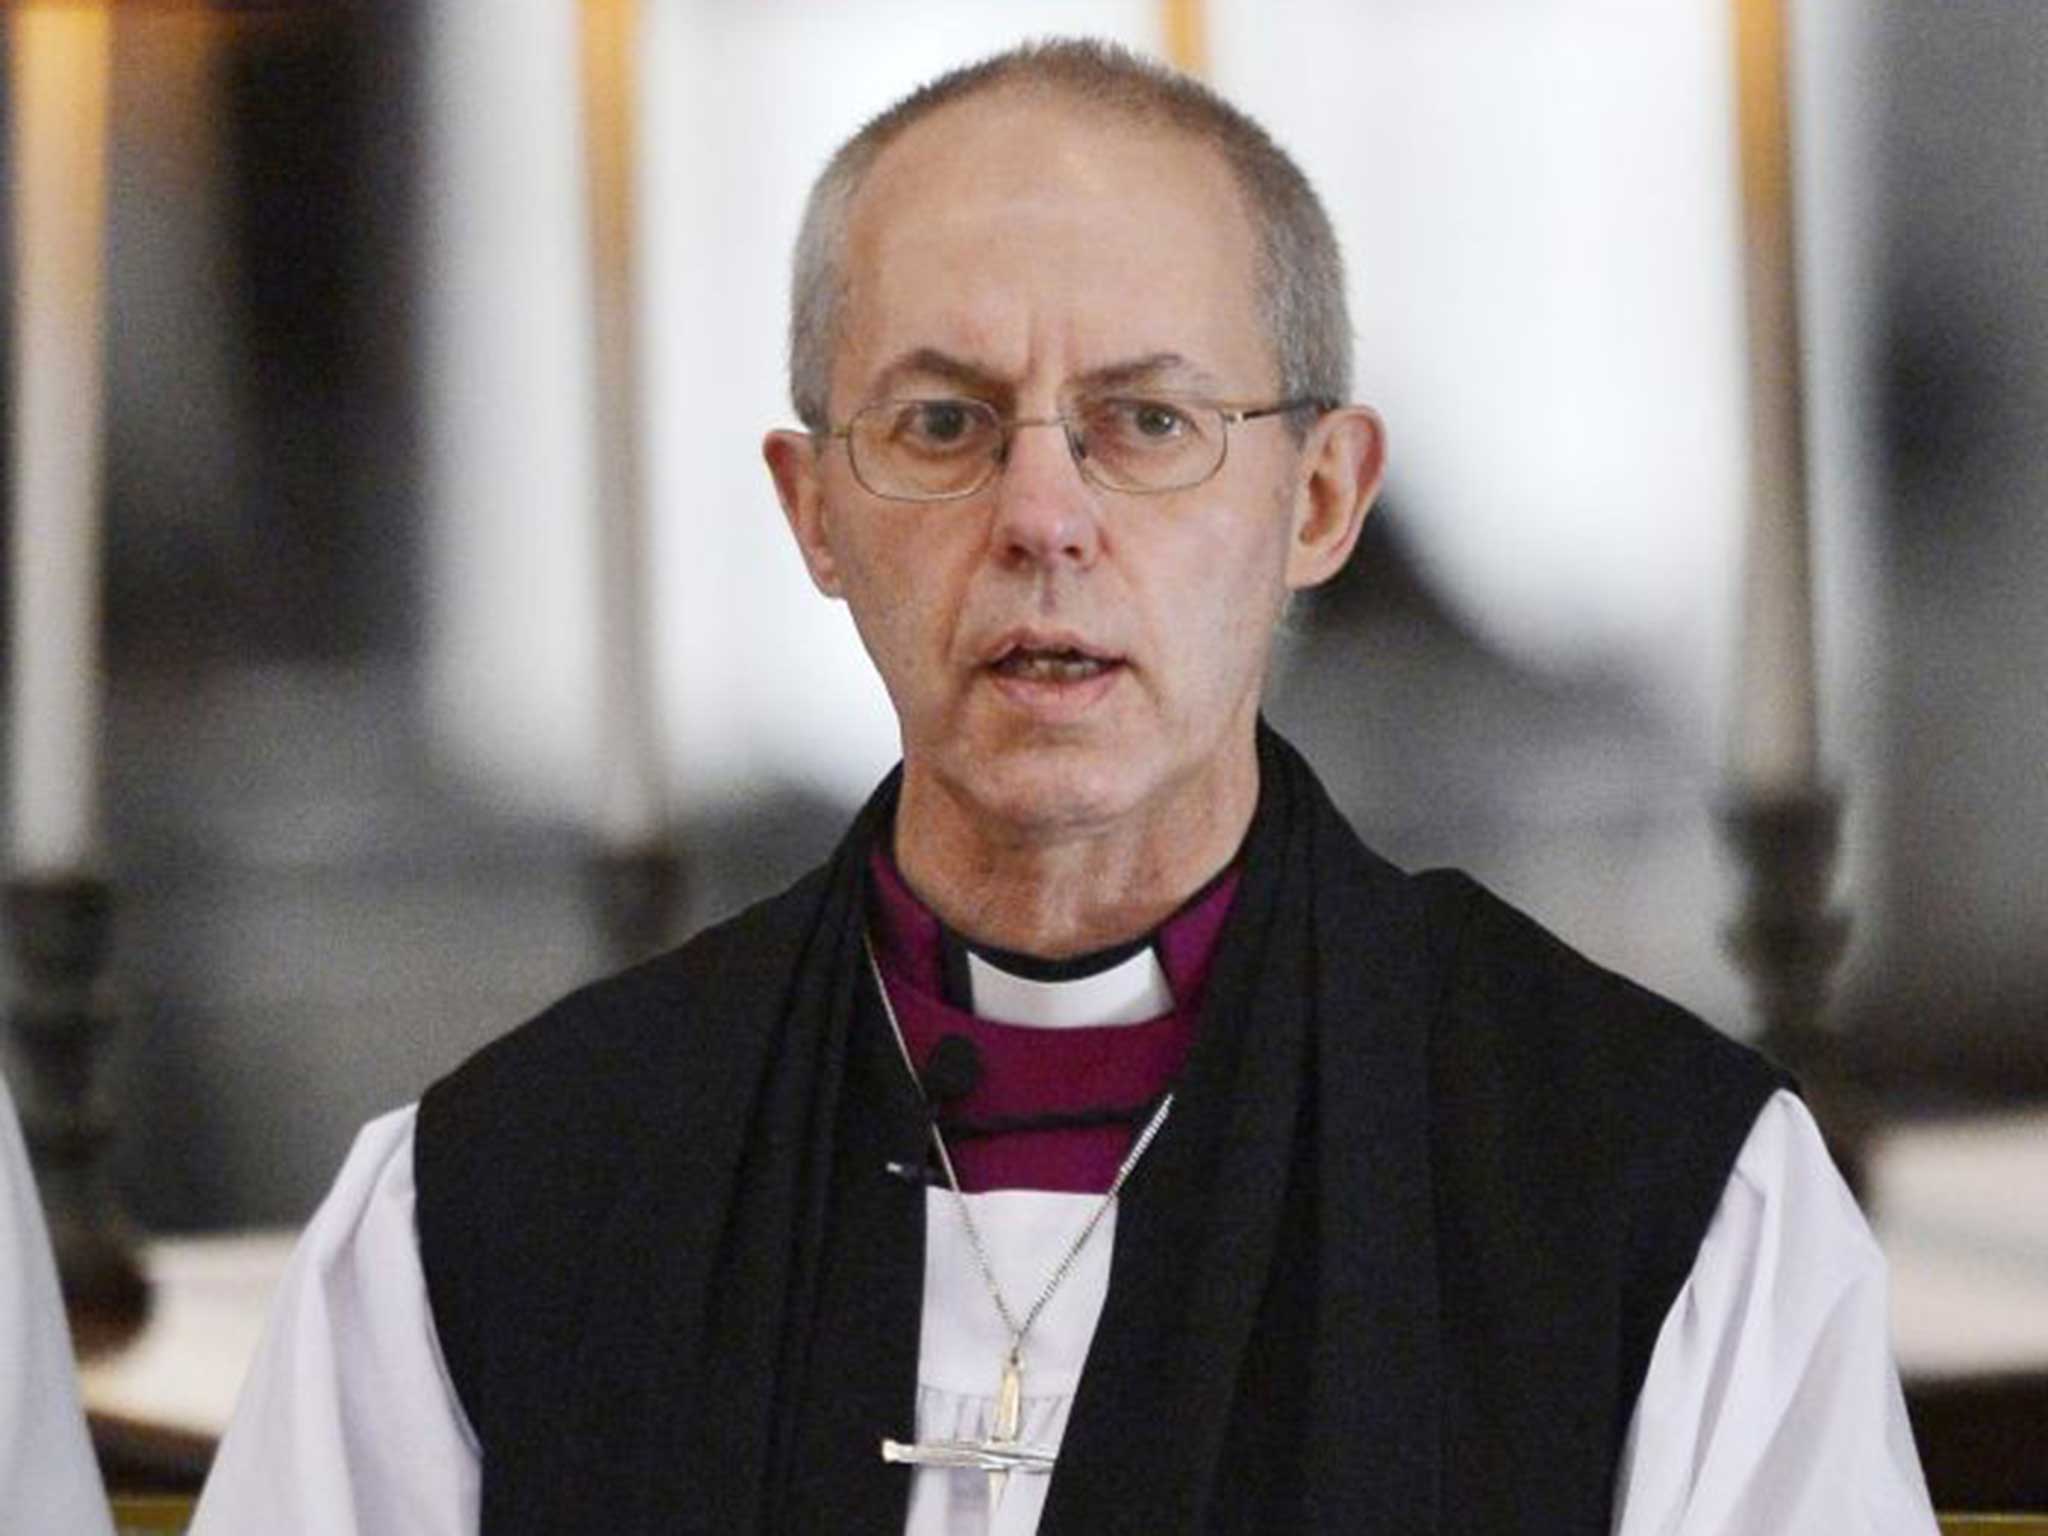 Archbishop Welby has admitted to having doubts about the existence of God